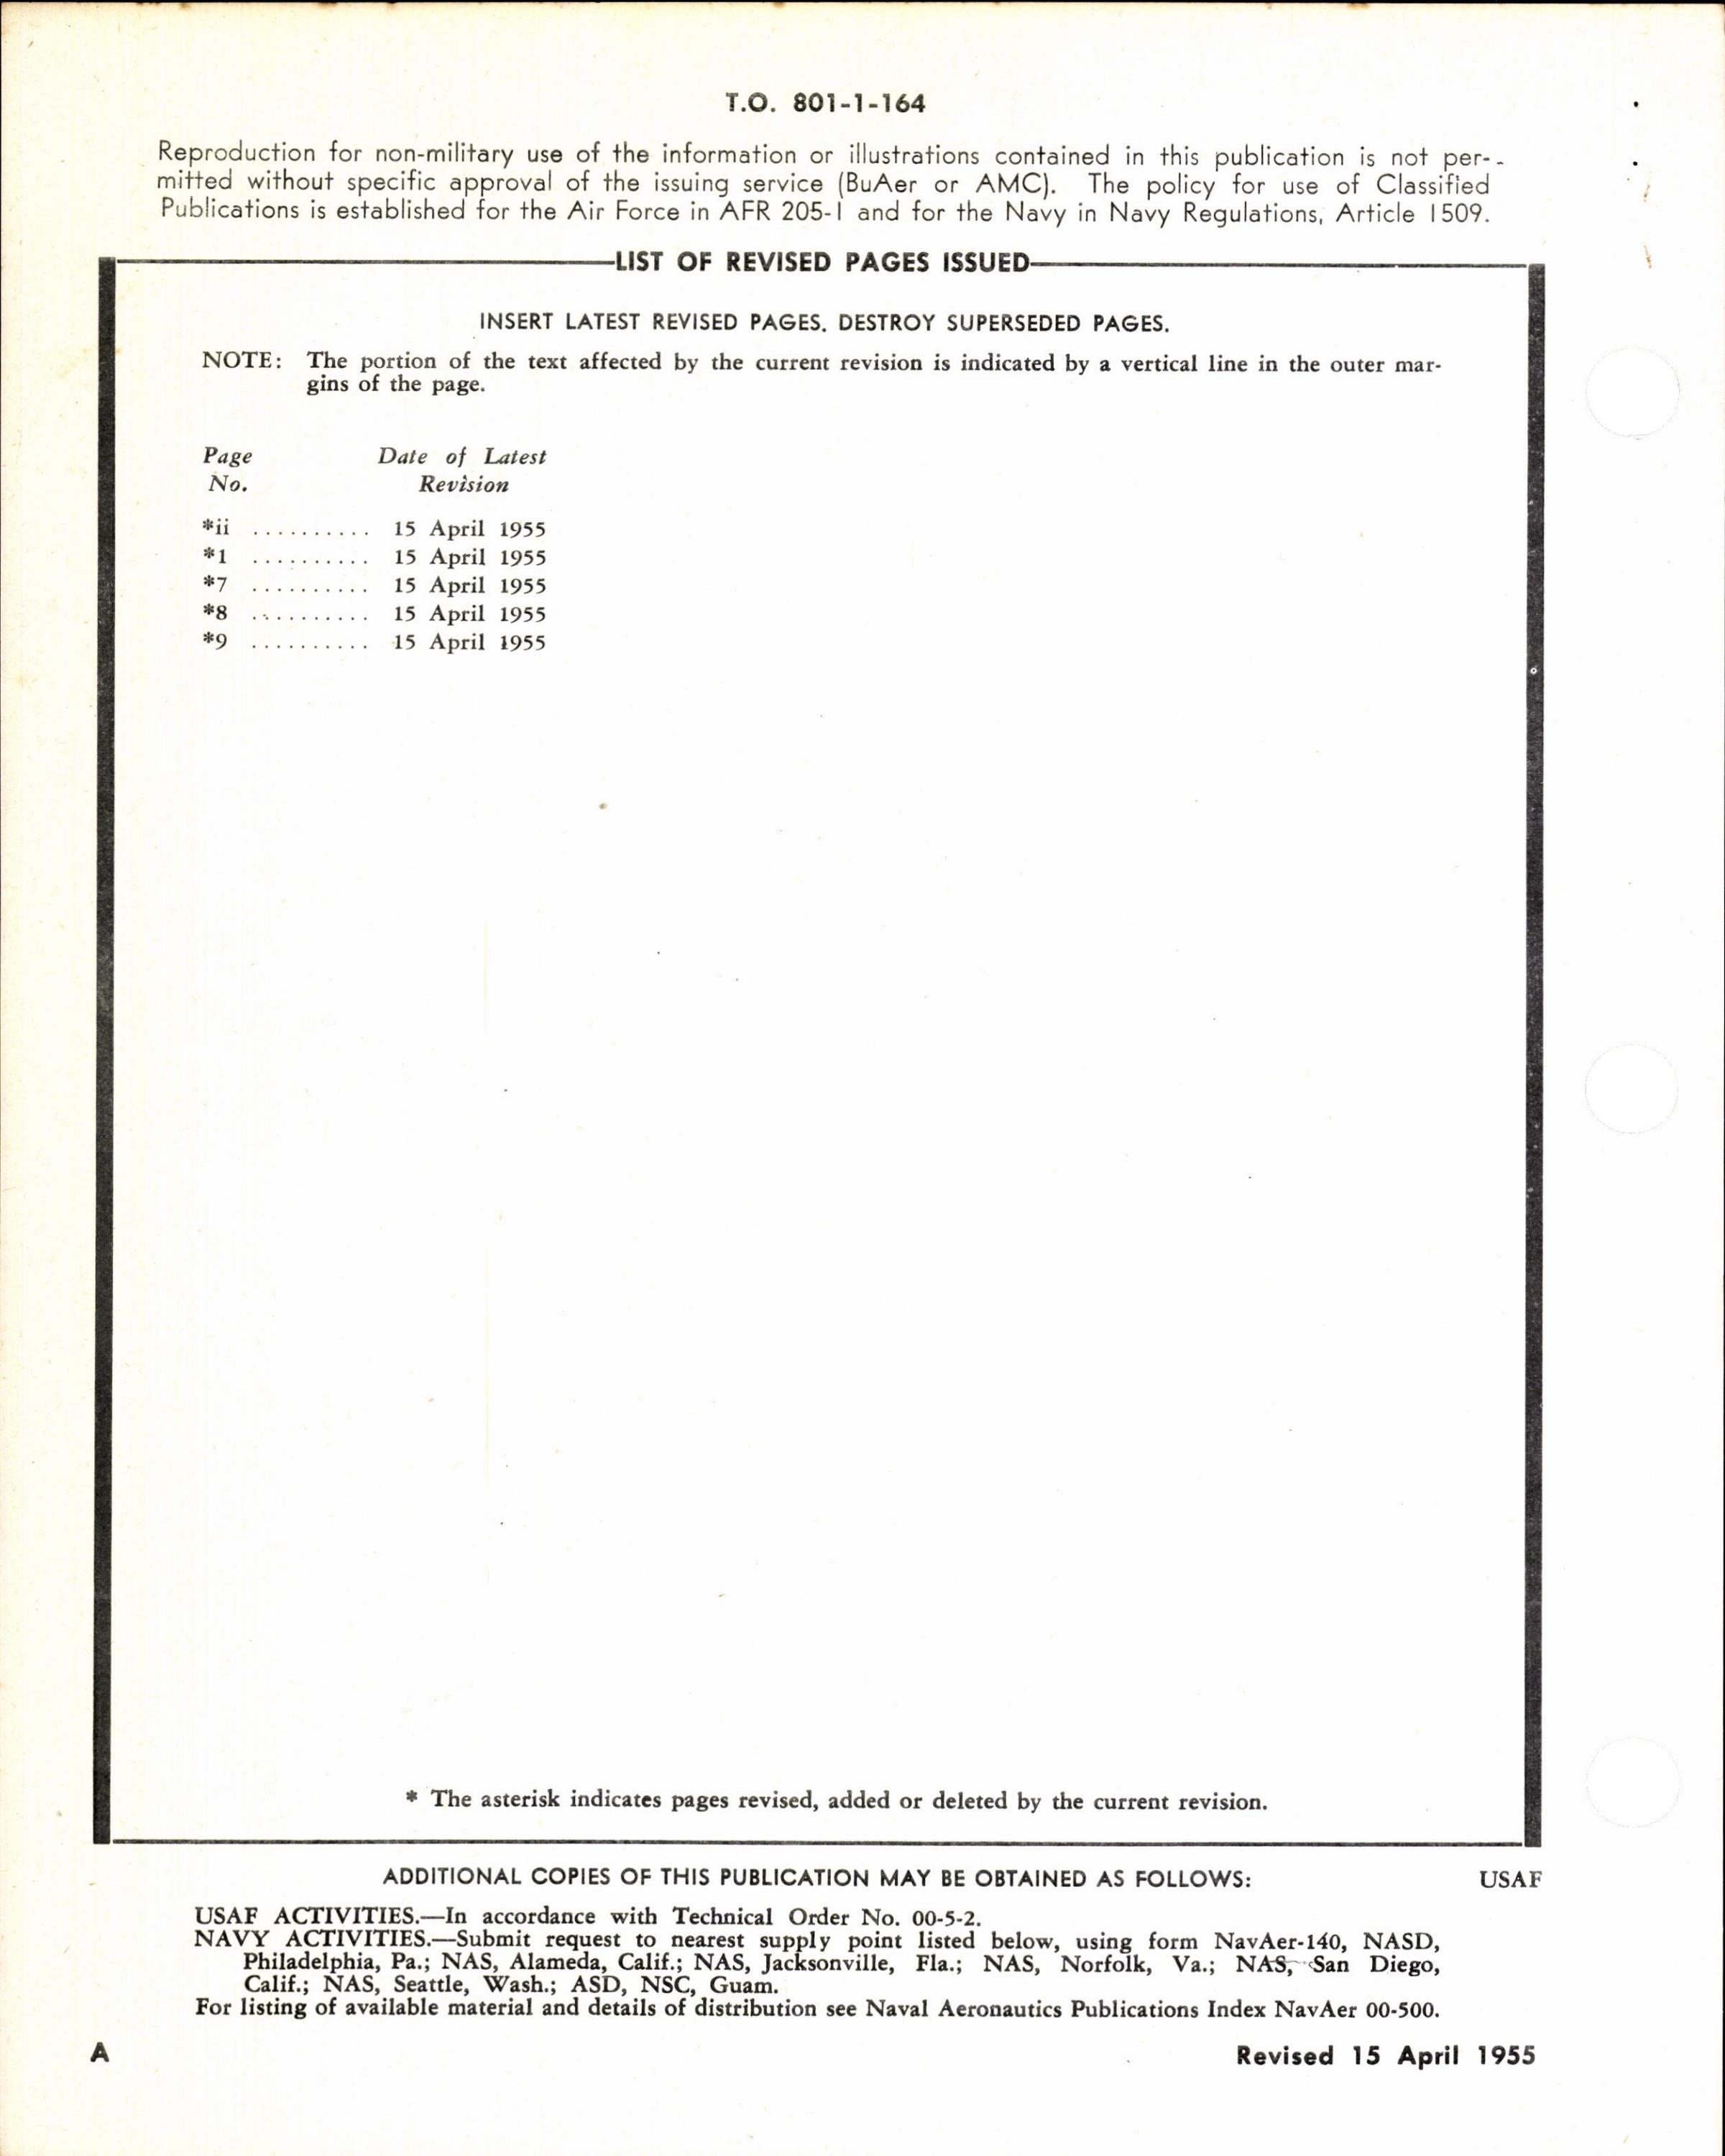 Sample page 2 from AirCorps Library document: Overhaul Instructions for Aircraft Actuators Models D100B, D750B, D380, D1040-1, D1040-2, D1040-3, C120, C280, and C290